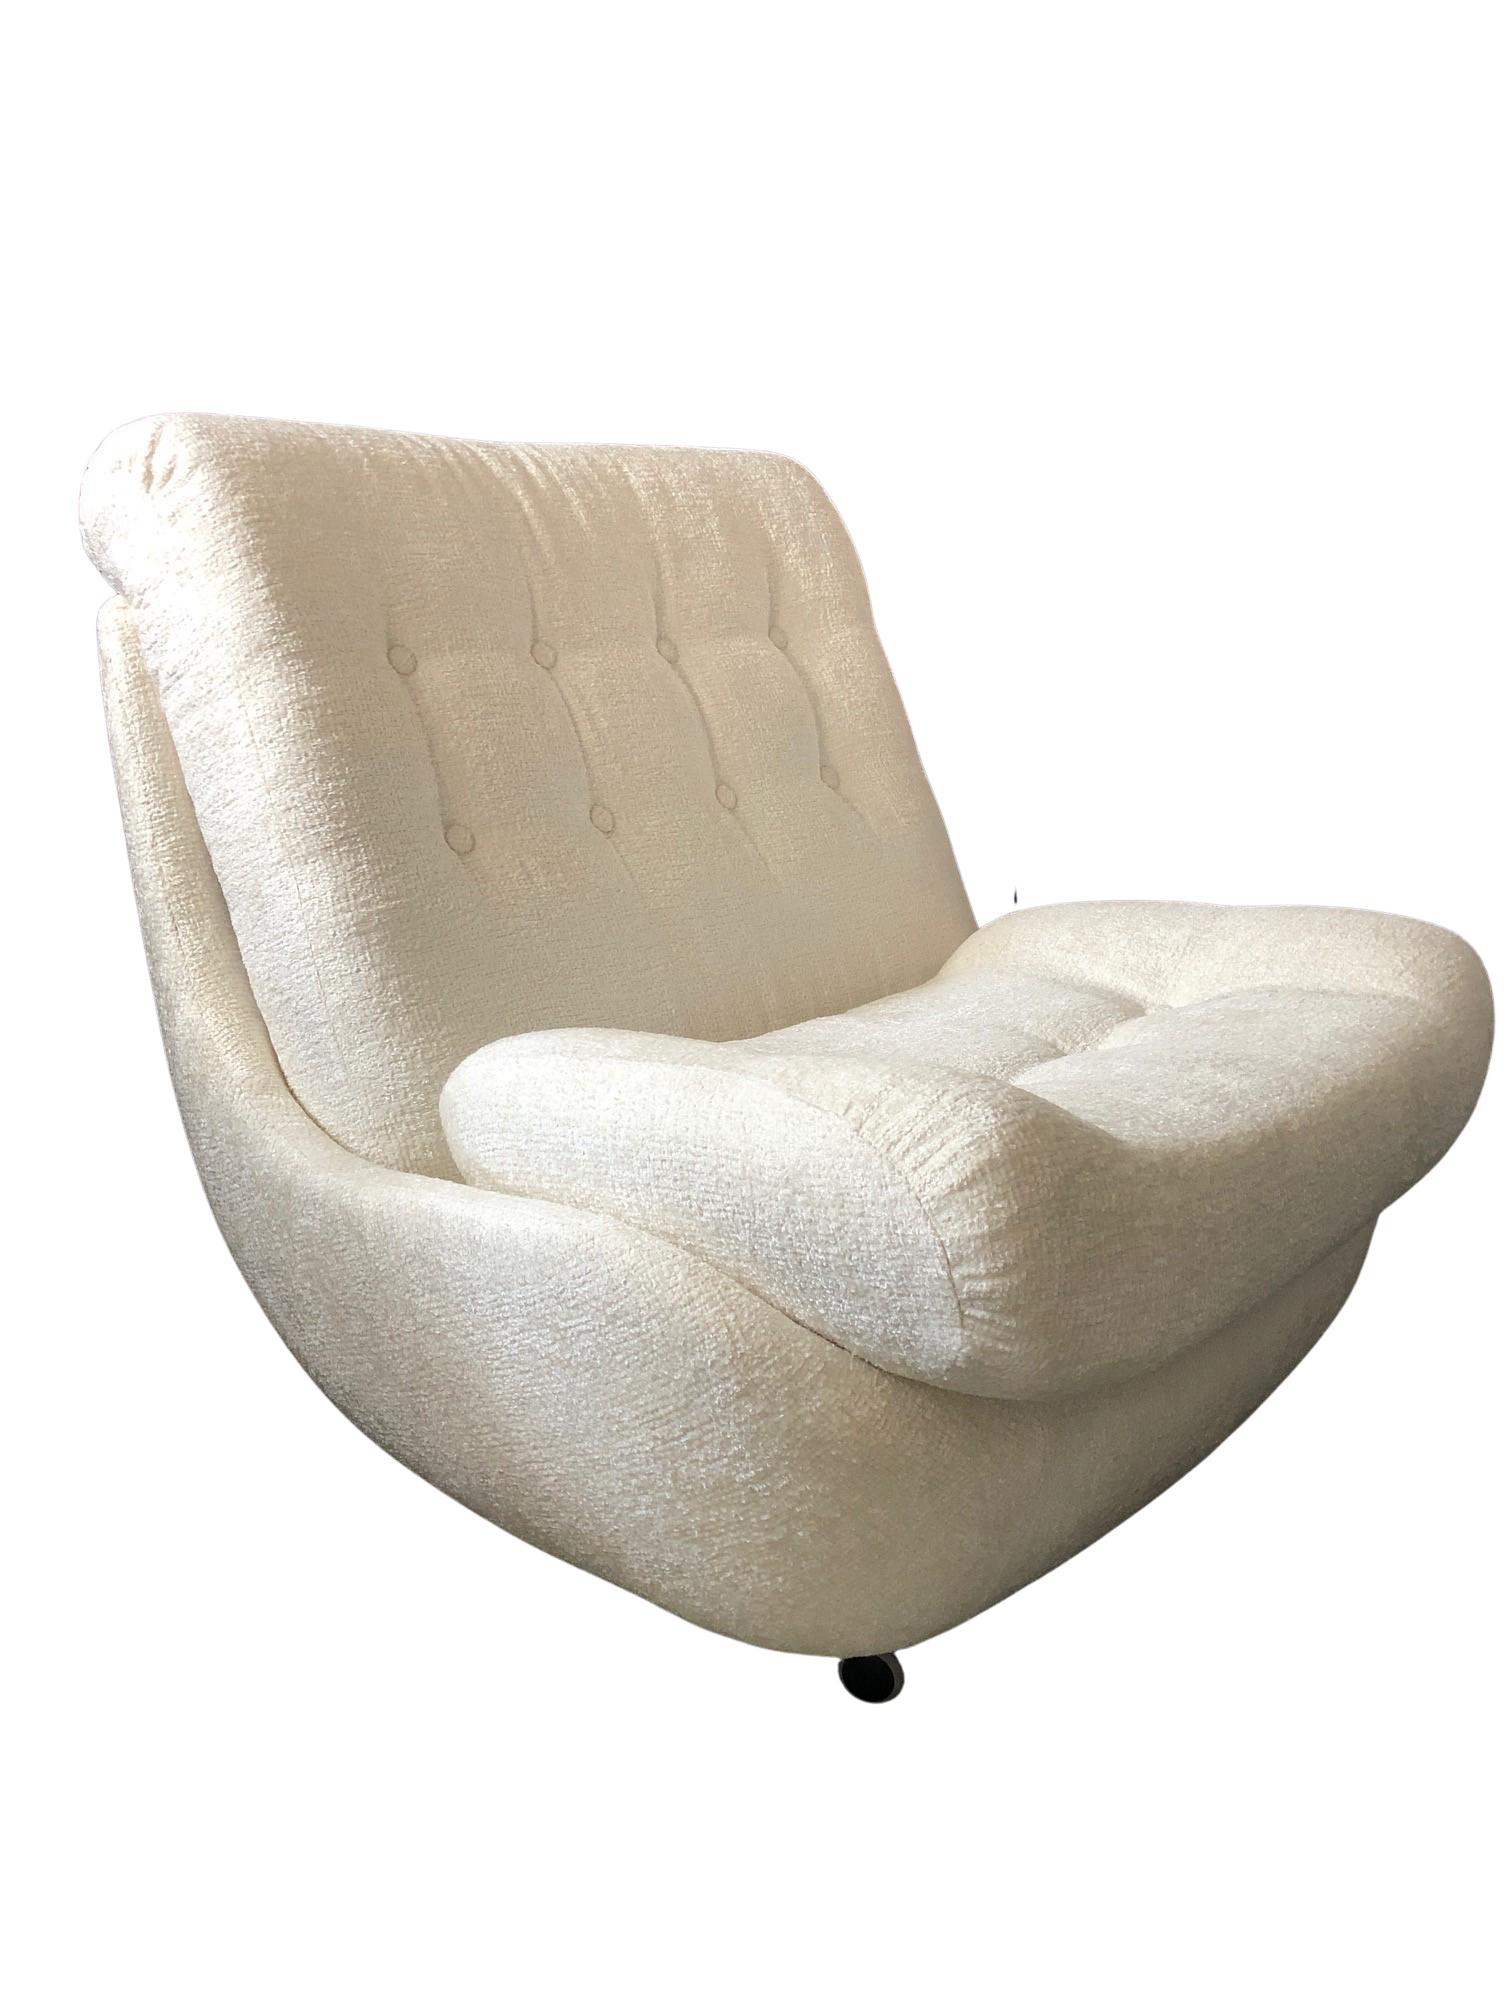 This rare Space Age armchairs set was produced in the 1960s in Czechoslovakia. They are big and extremely comfortable. The armchairs are made of reinforced polystyrene, thanks to which they are ultra-light. The upholstery is high quality boucle type